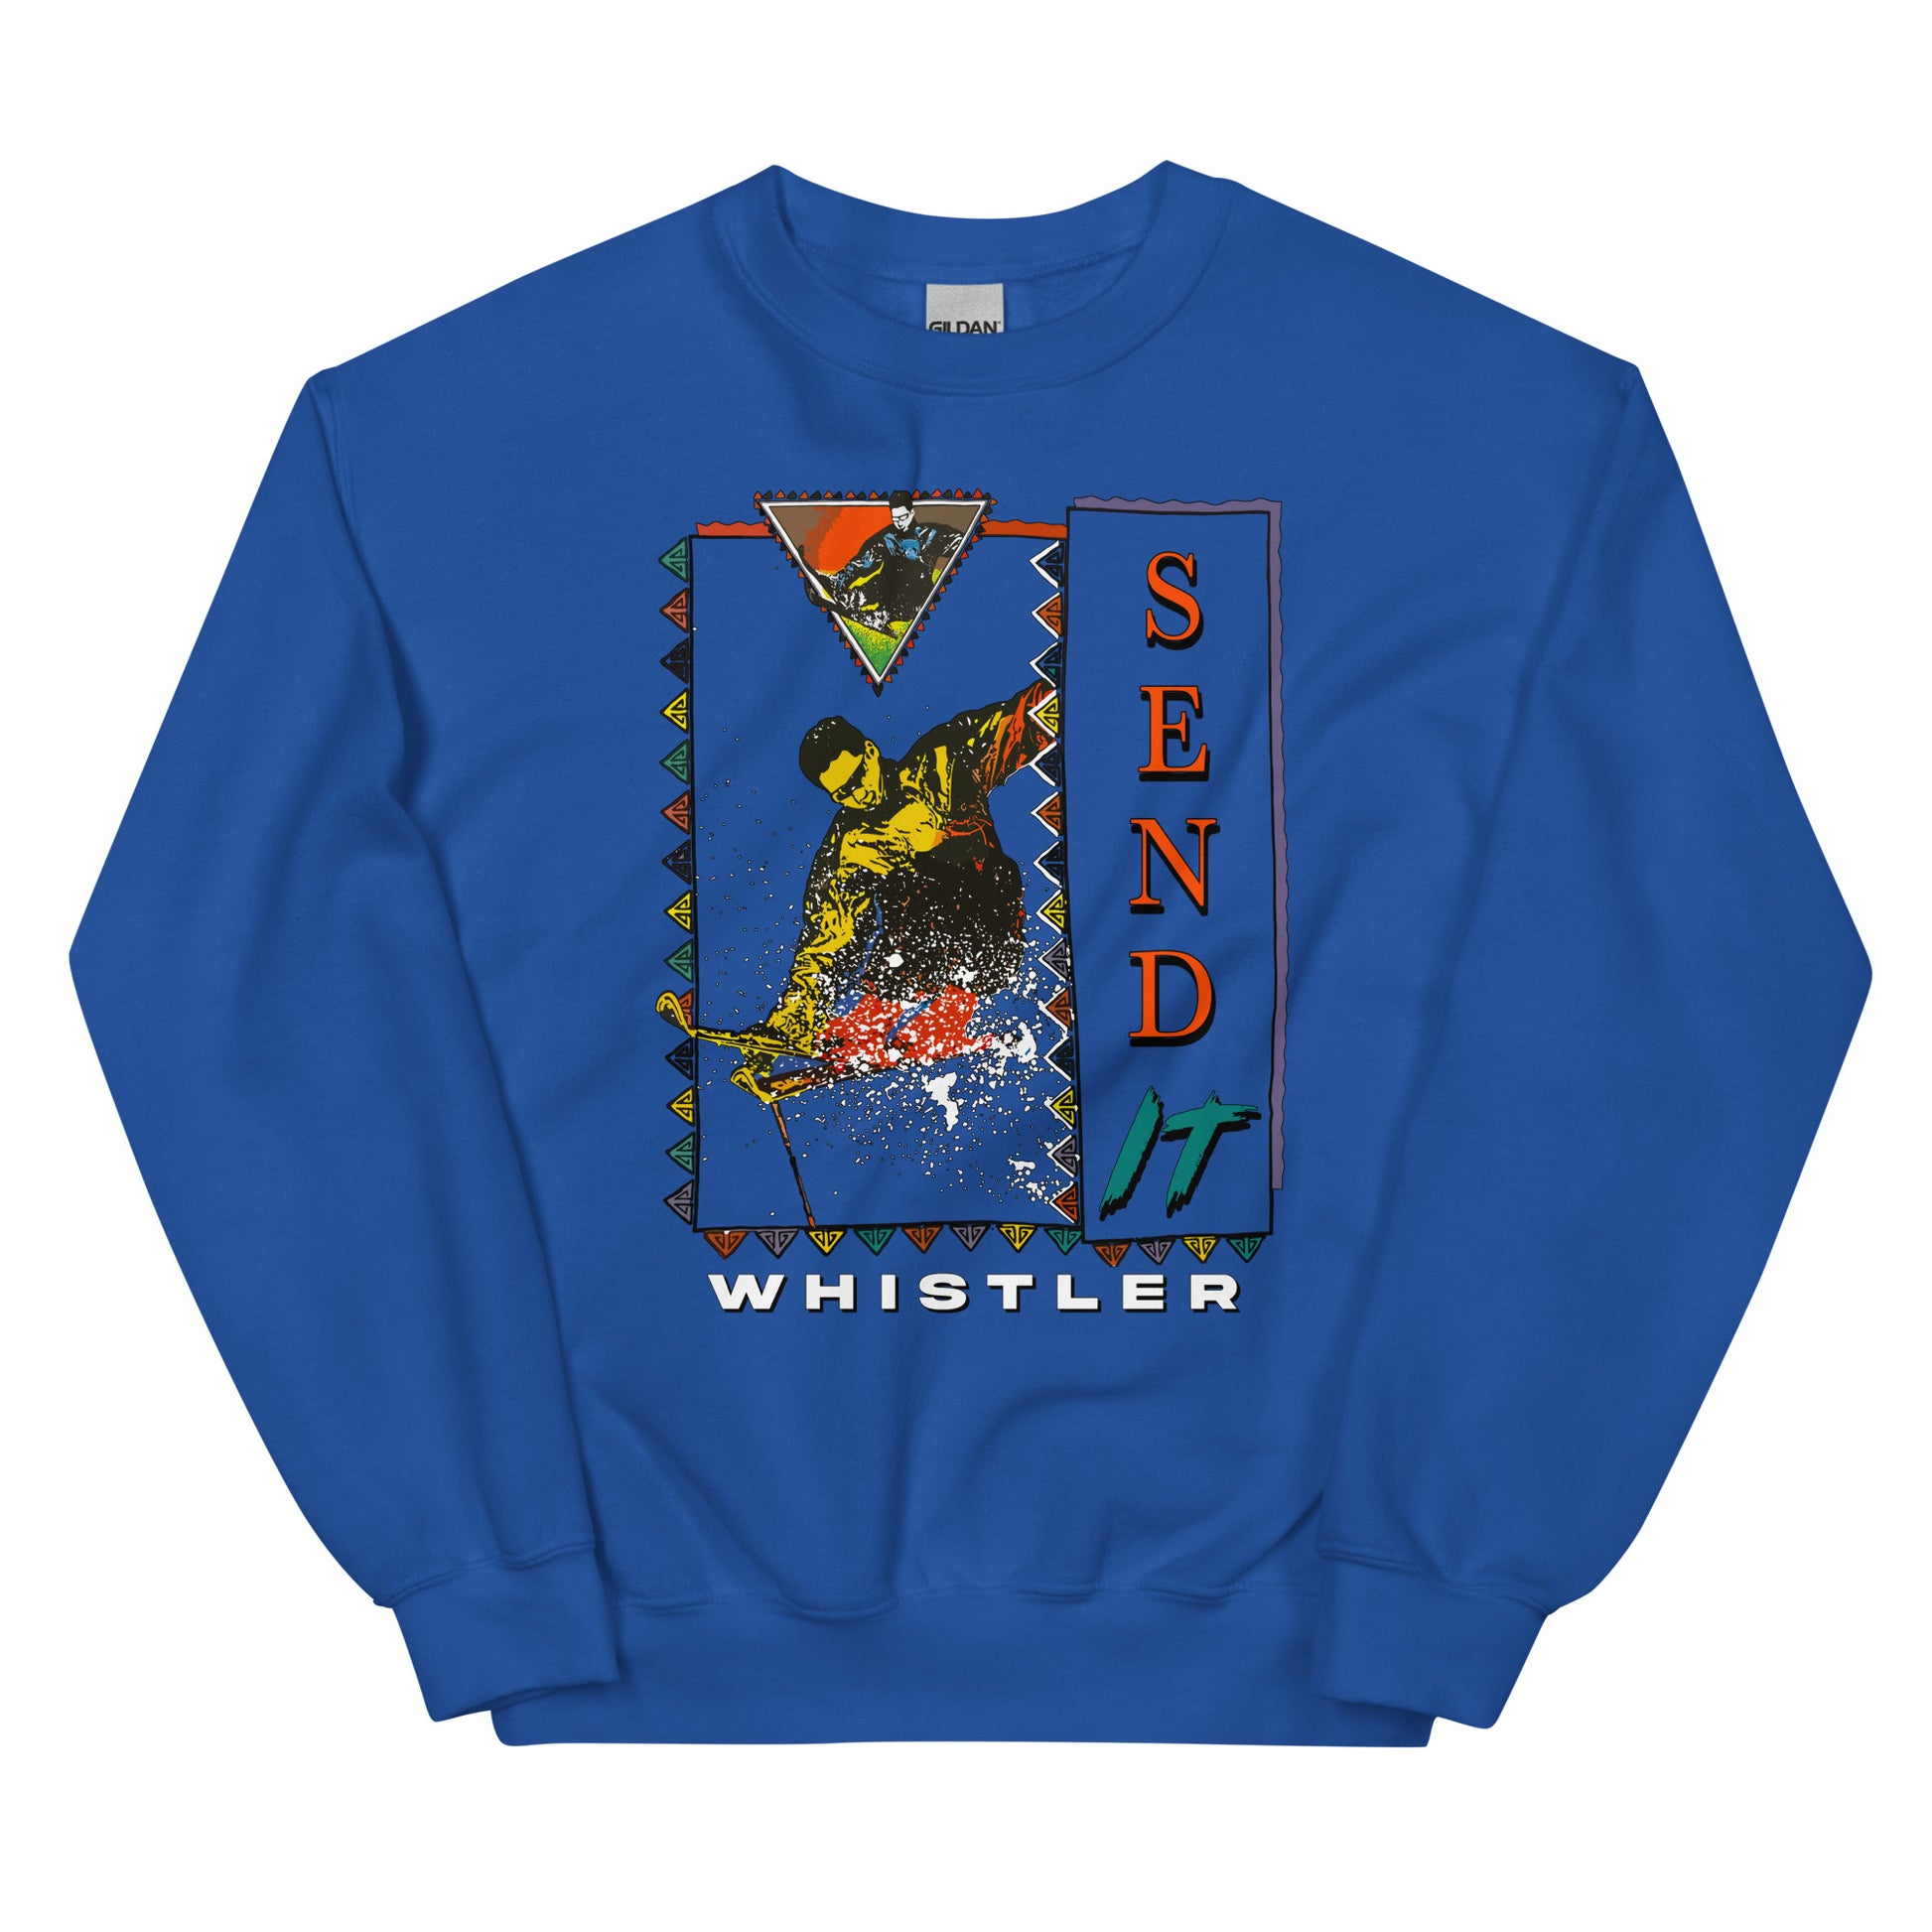 Send it whistler printed on a crewneck sweatshirt by Whistler Shirts